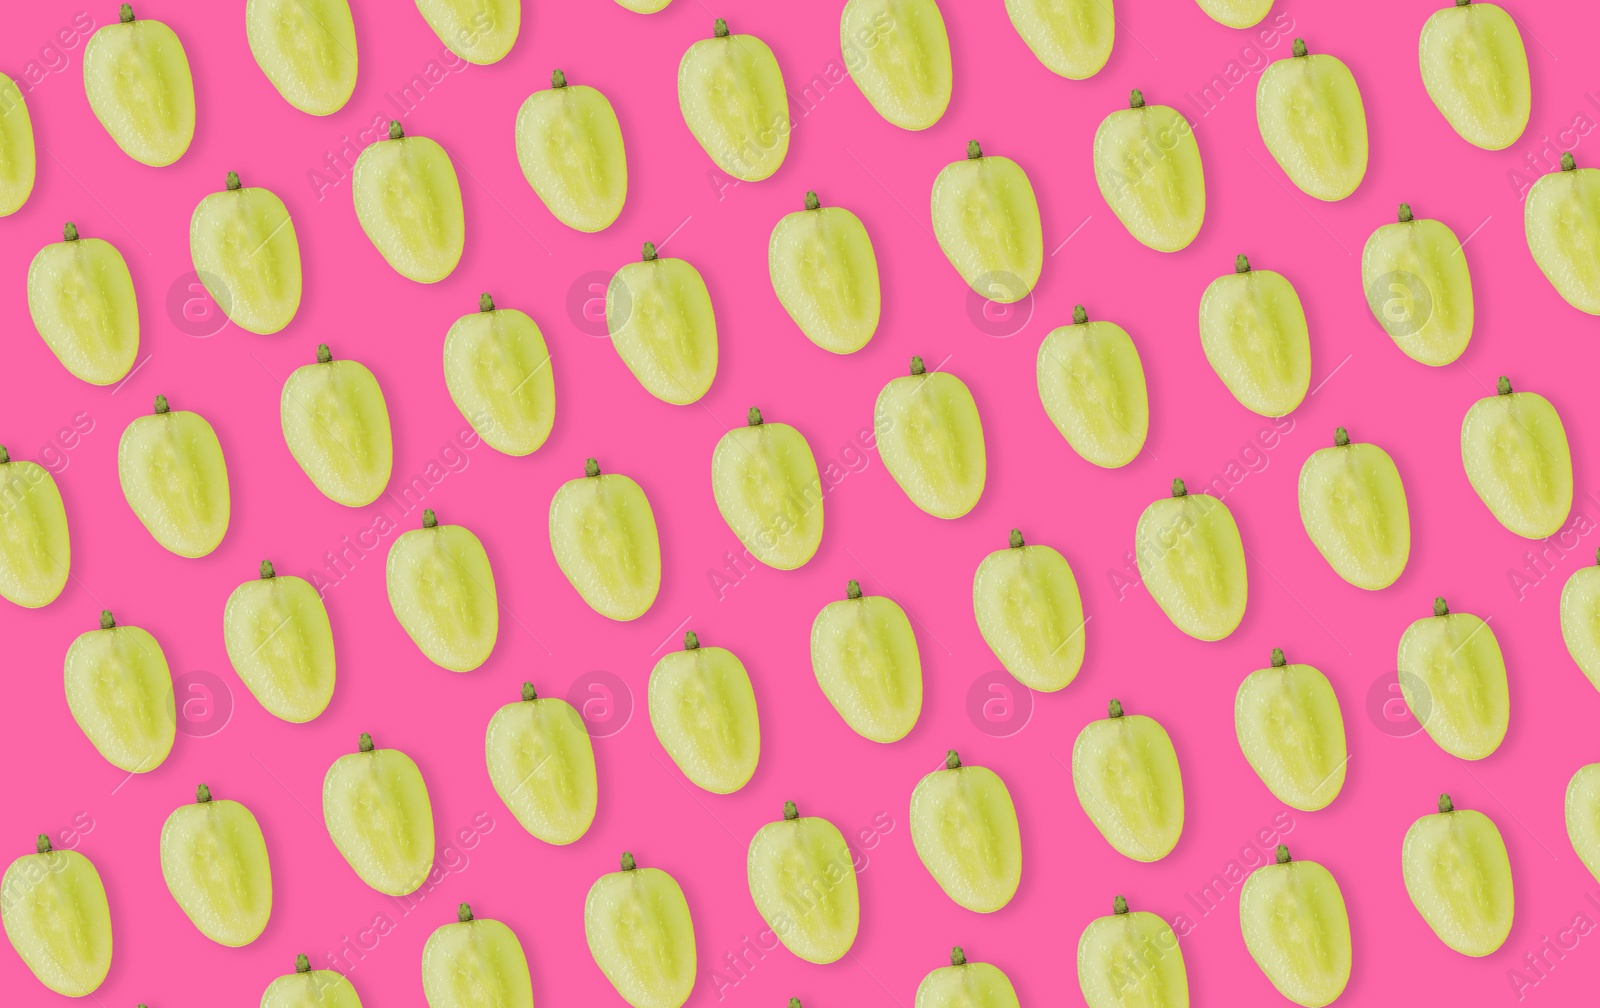 Image of Pattern of grape halves on bright pink background